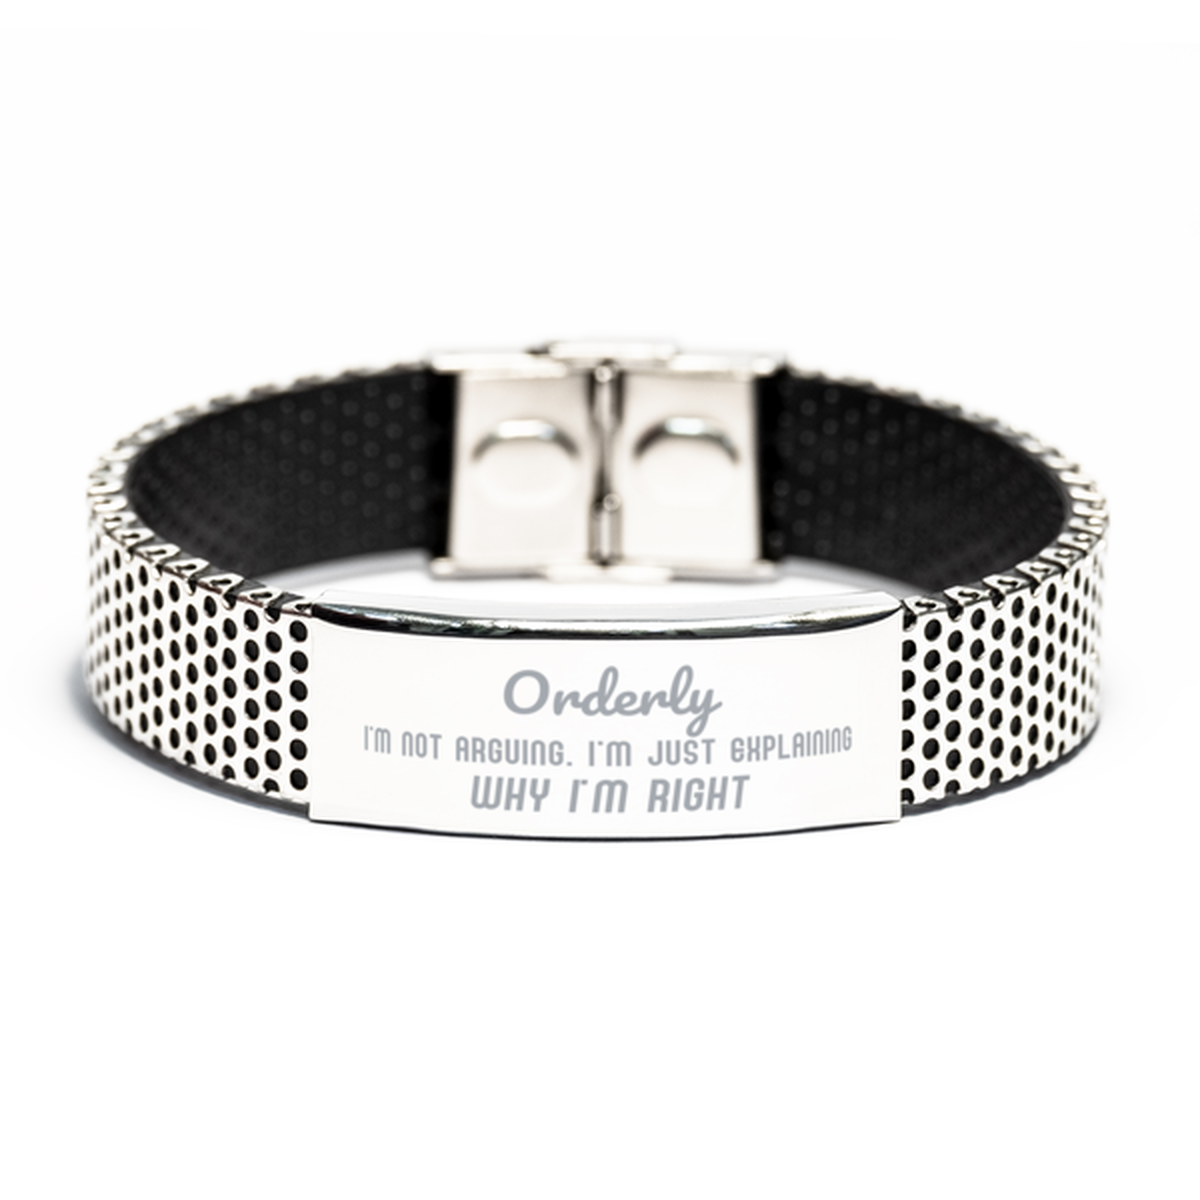 Orderly I'm not Arguing. I'm Just Explaining Why I'm RIGHT Stainless Steel Bracelet, Funny Saying Quote Orderly Gifts For Orderly Graduation Birthday Christmas Gifts for Men Women Coworker